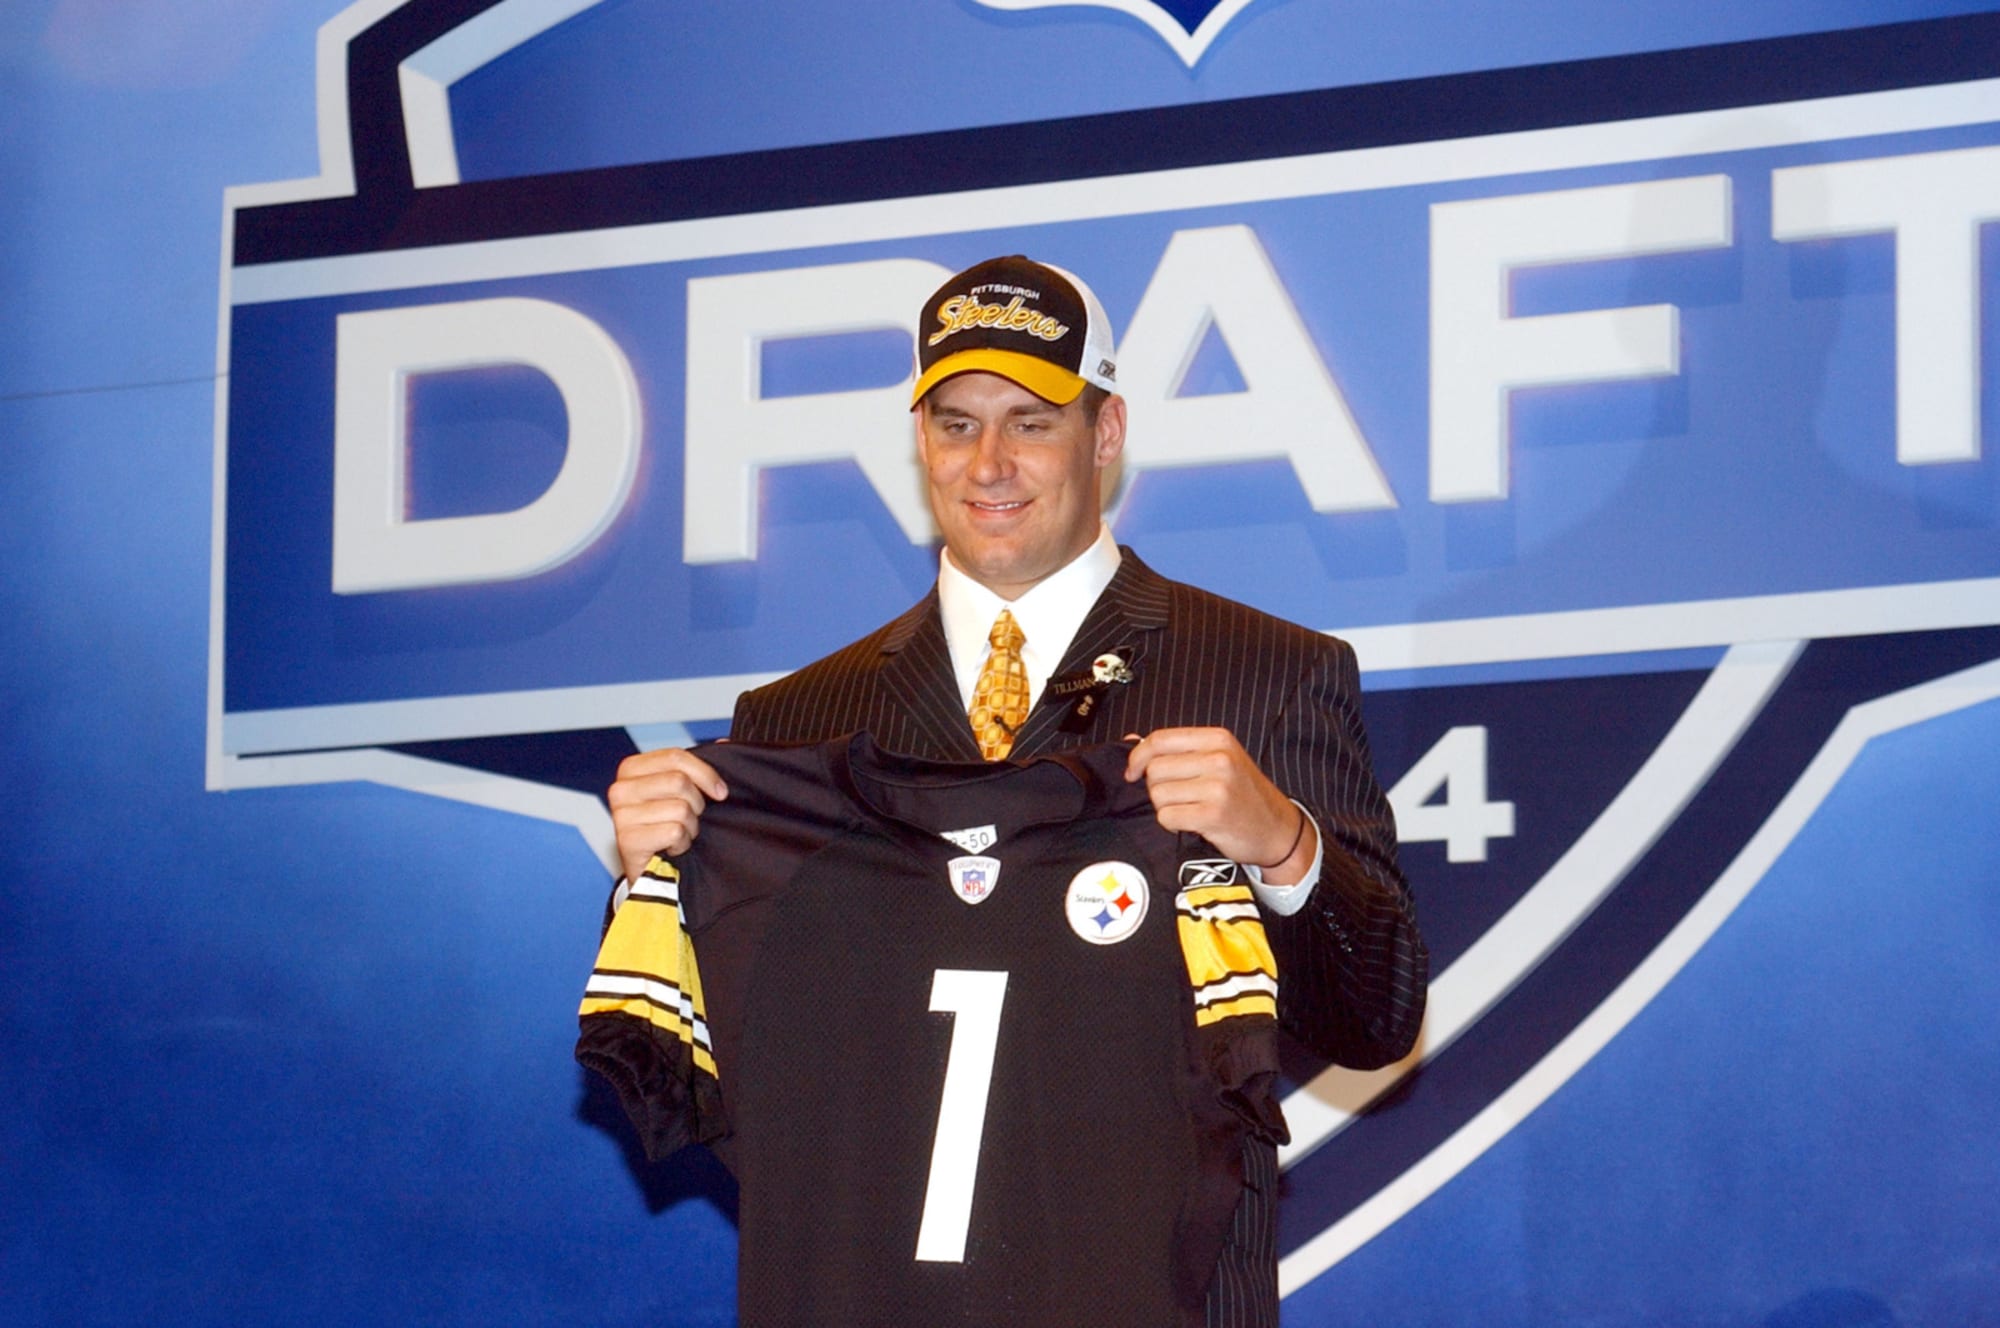 Steelers QB Ben Roethlisberger goes 1st overall in 2004 NFL re-draft